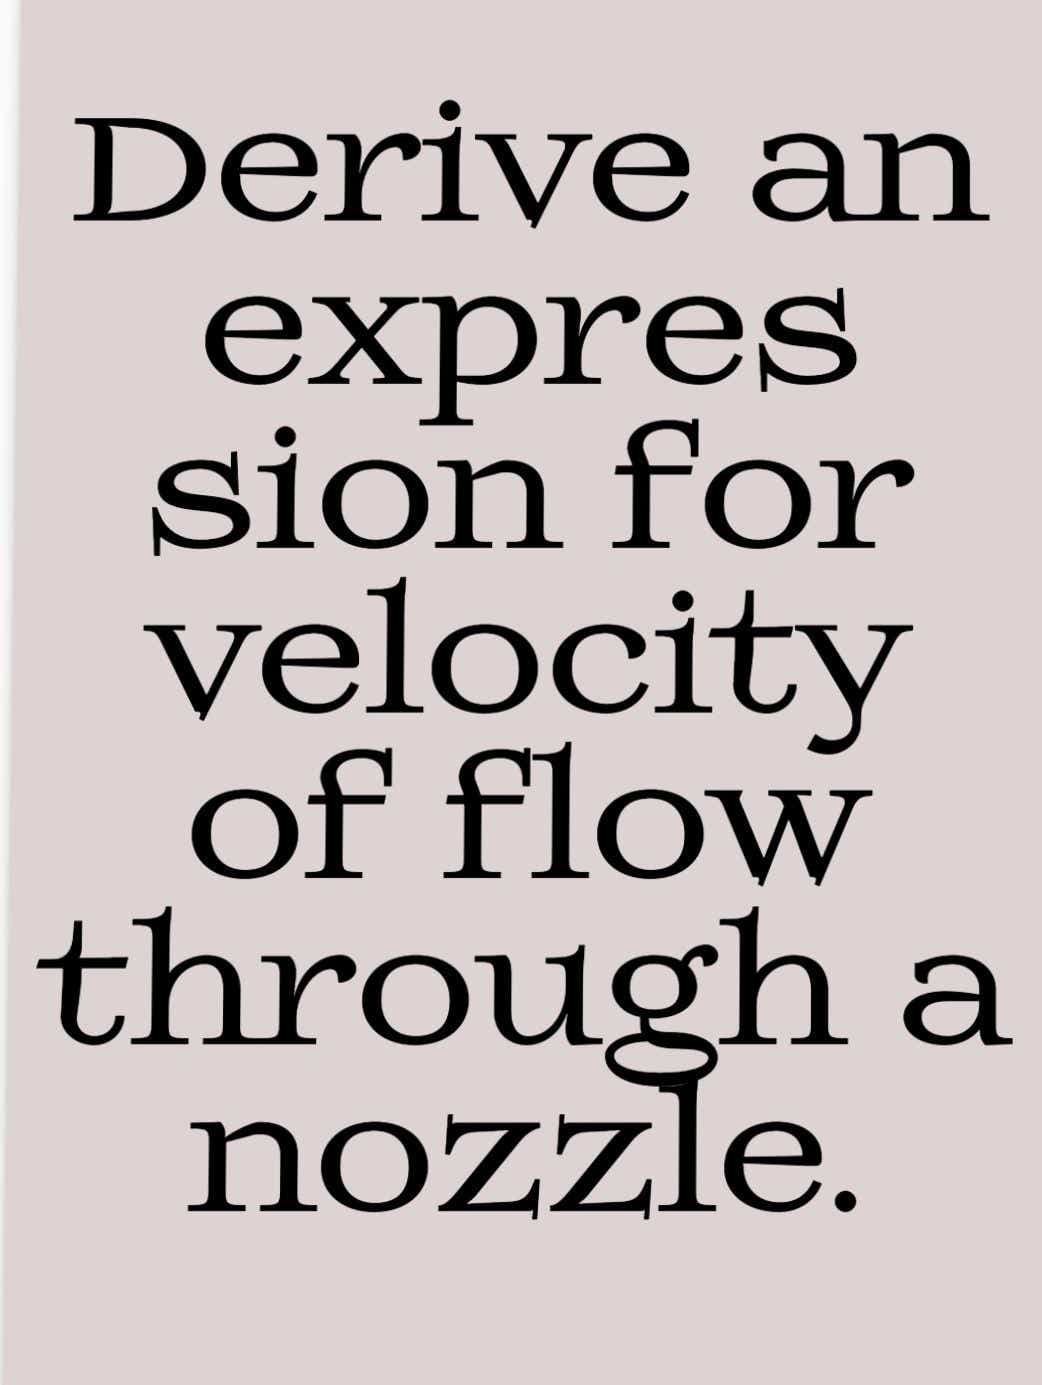 Deriye an
expres
sion for
velocity
of flow
through a
nozzle.
